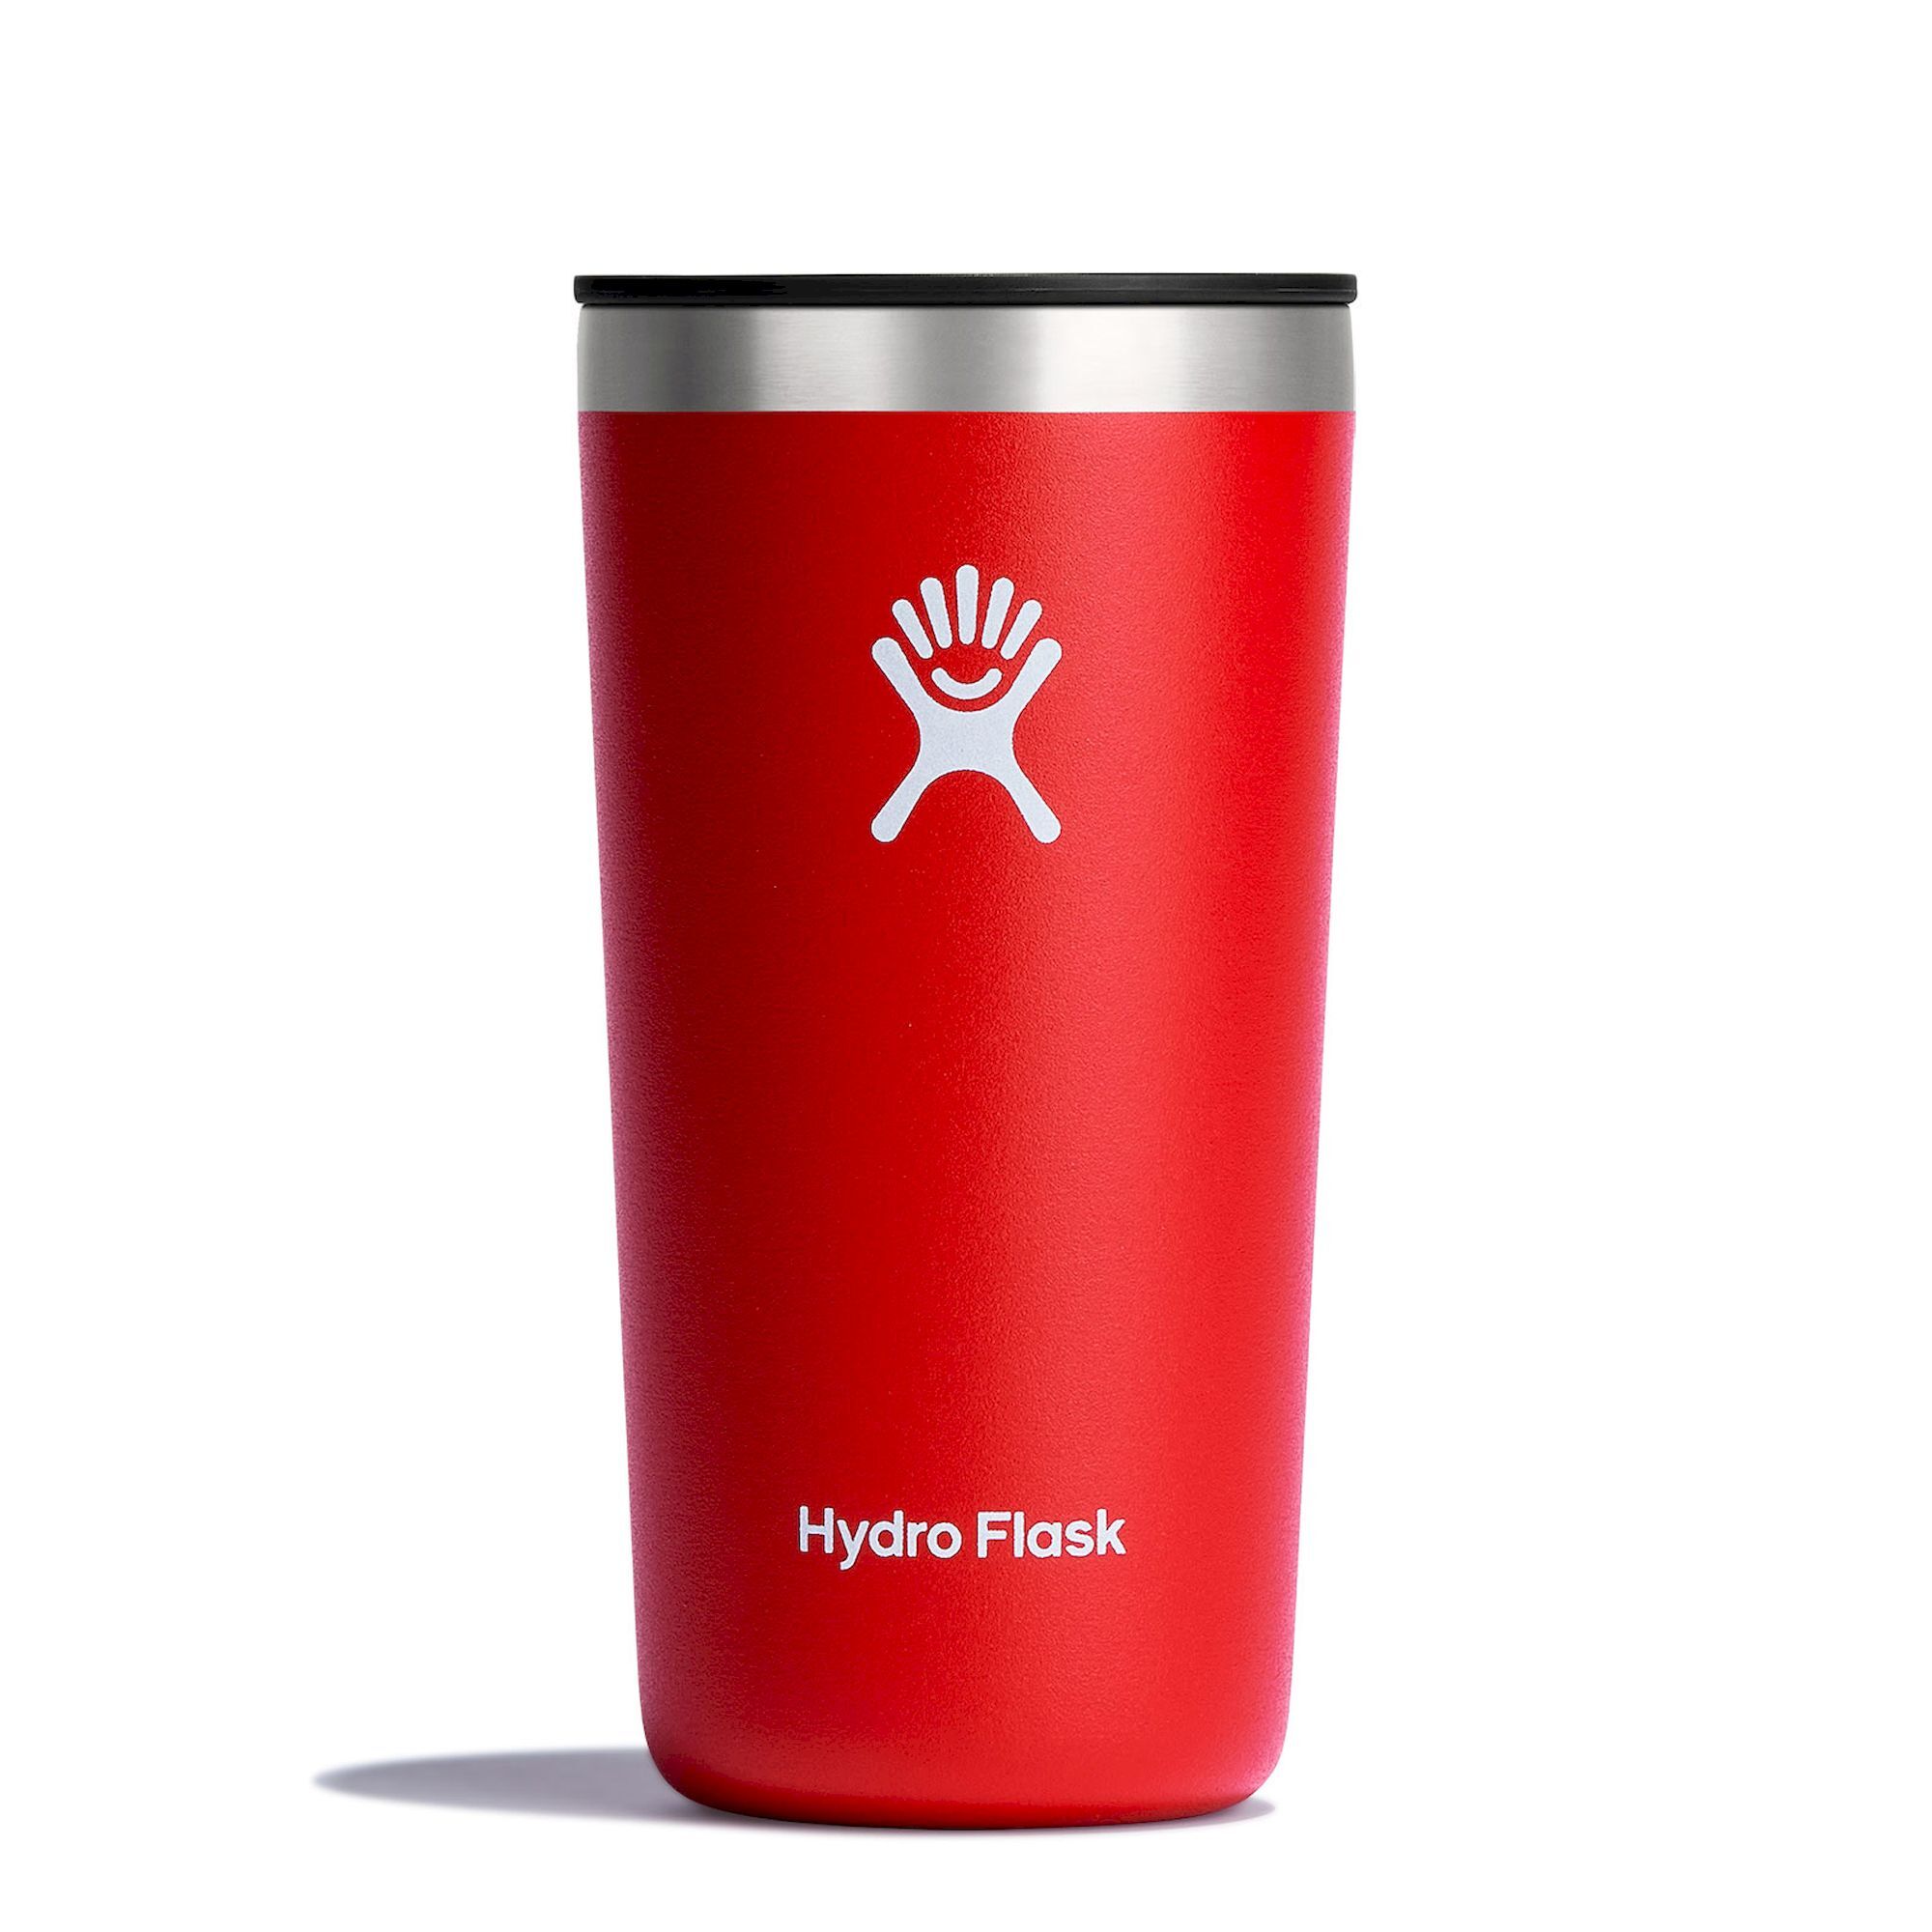 Hydro Flask 12 Oz All Around Tumbler - Isolierflasche